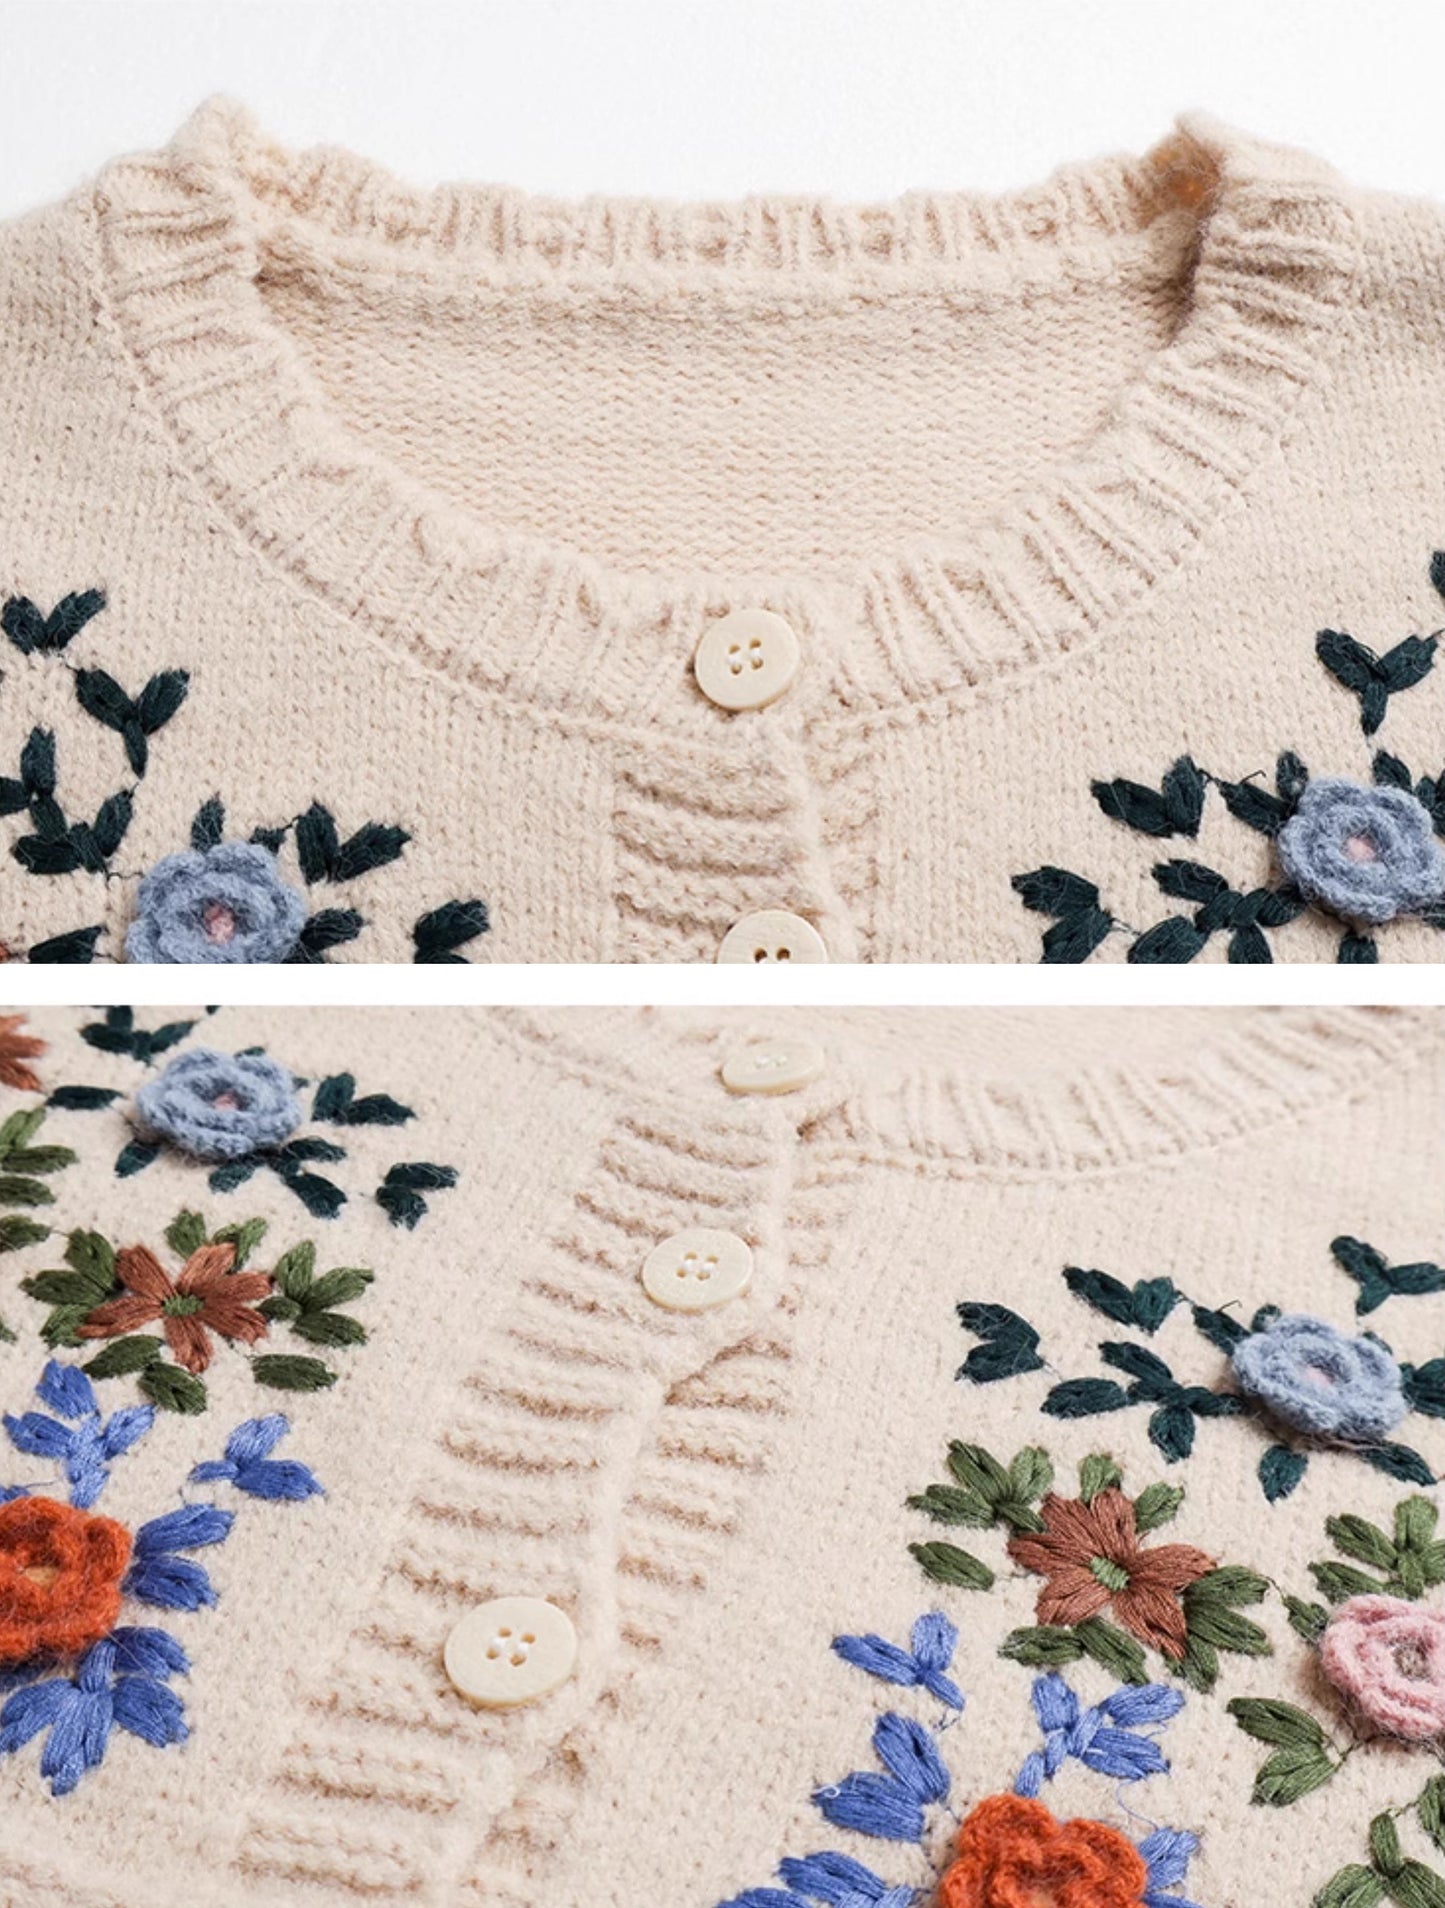 Grandma's Autumn Floral Embroidered Cardigan (2 Colors)